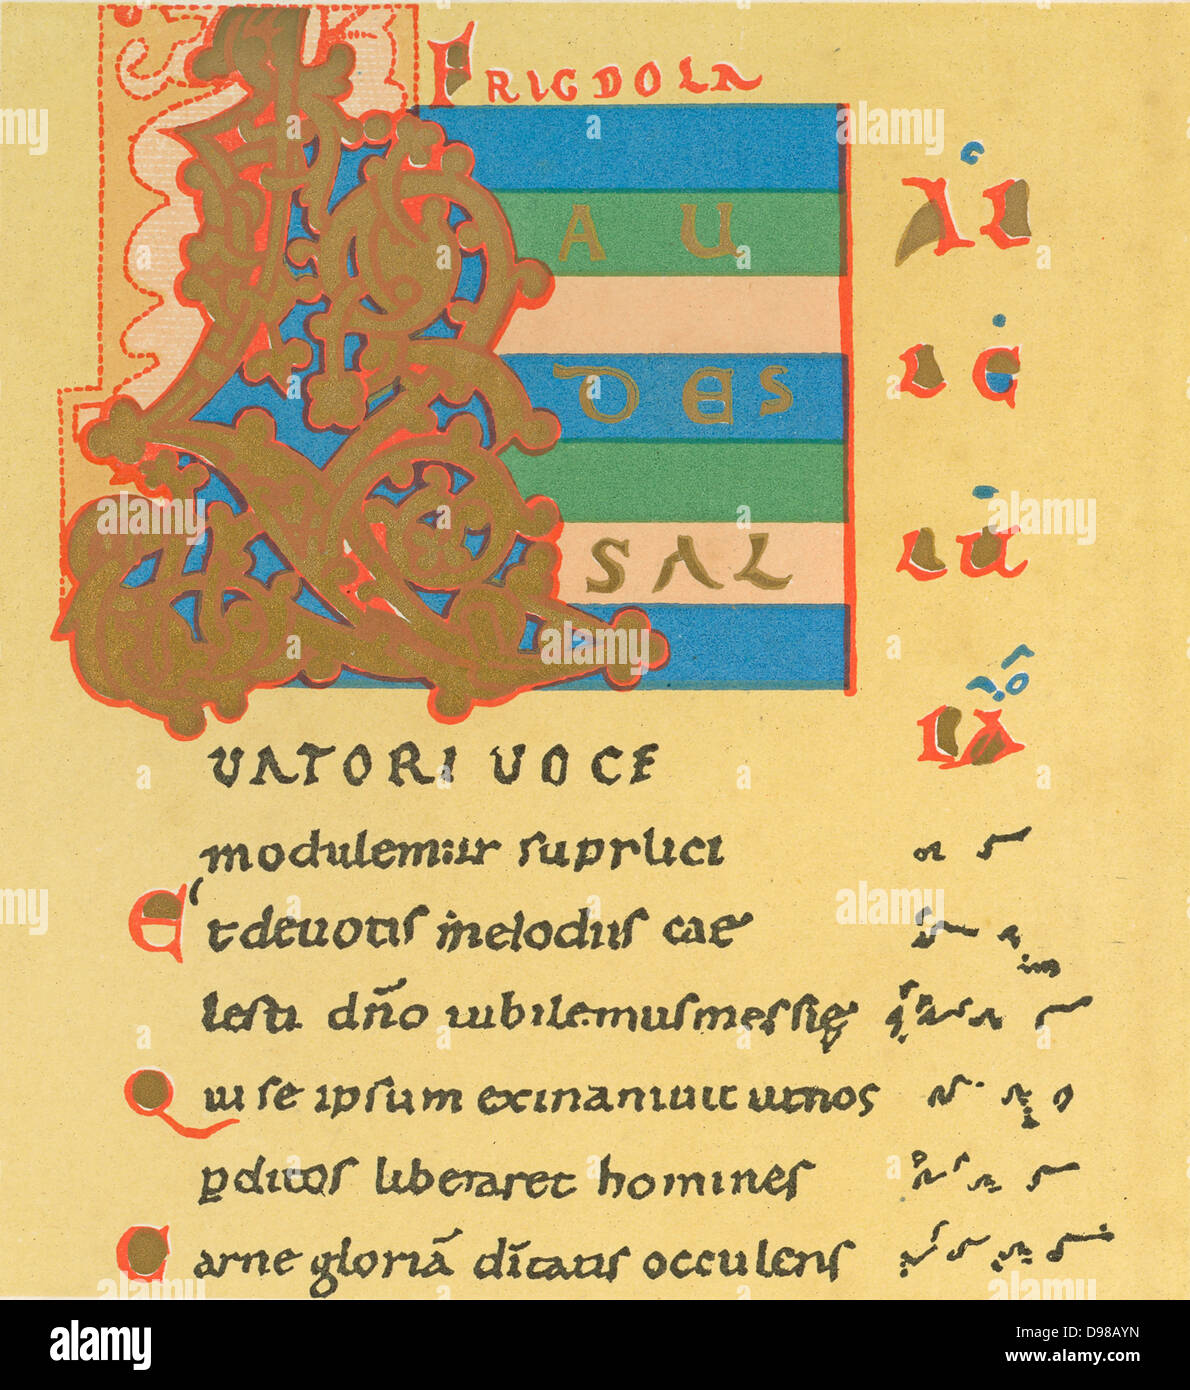 Musical notation. First page of Notker's Easter Sequence, 'Laudes Salvatori' showing Neums notation for Gregorian chant, a system of writing music which was superseded by Staff notation. Notker (c840-912) Benedictine monk, poet and musician at the Abbey of St Gall, Switzerland. 10th century manuscript. Stock Photo